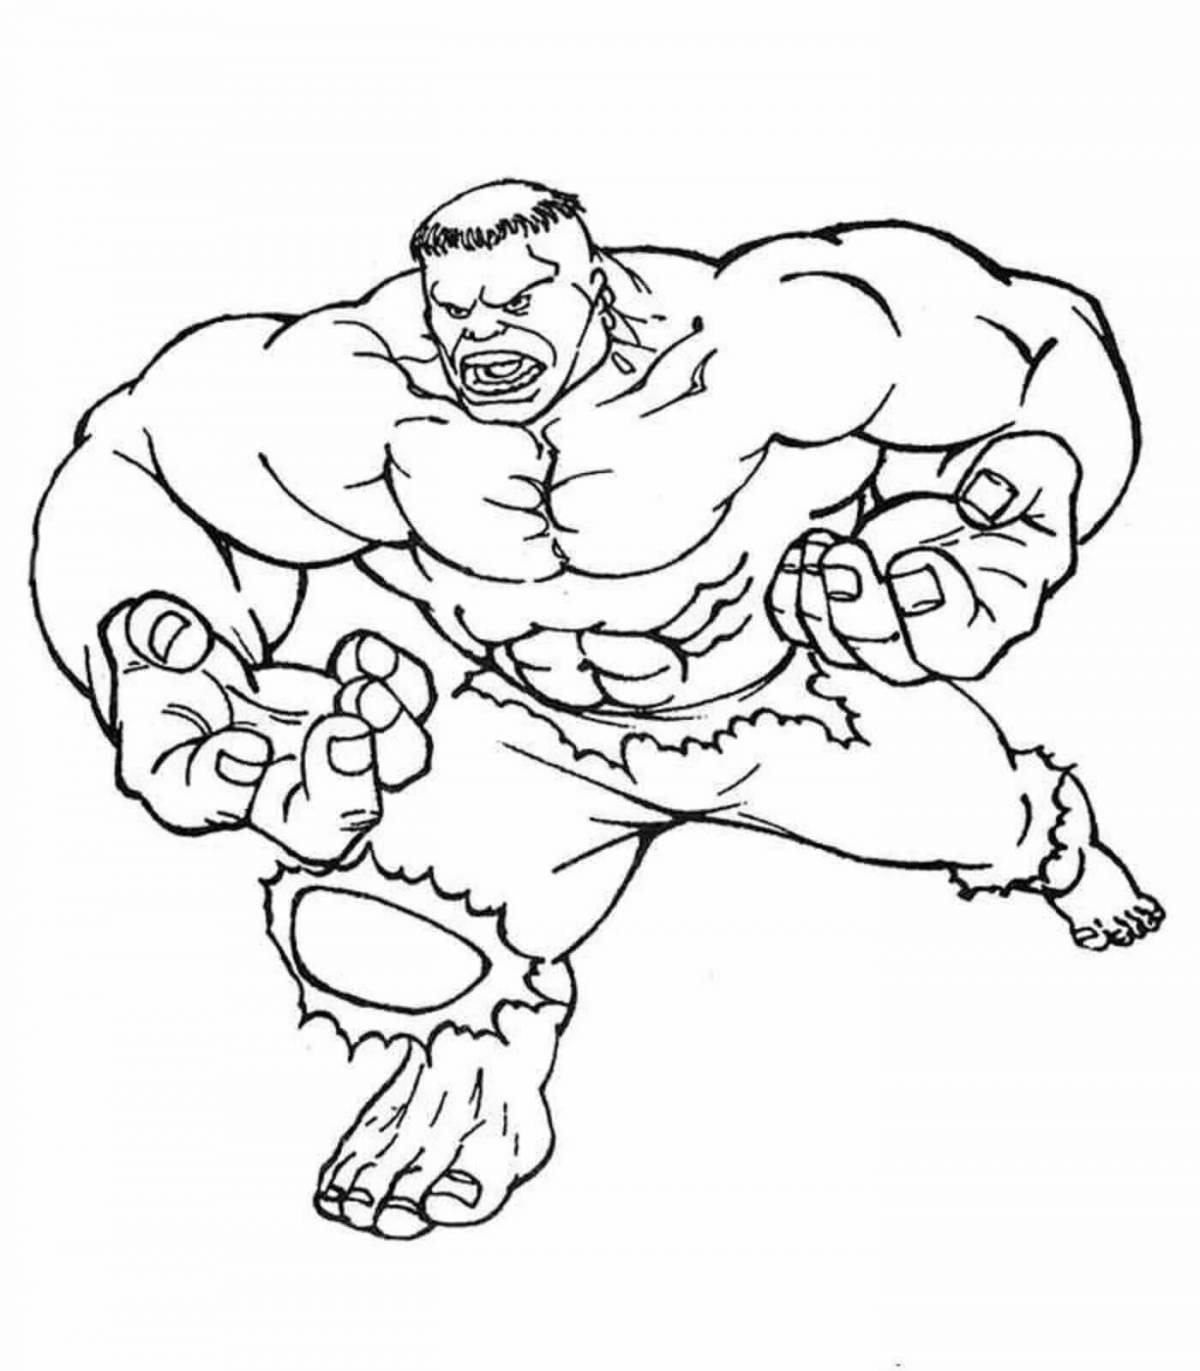 Bold hulk coloring book for boys